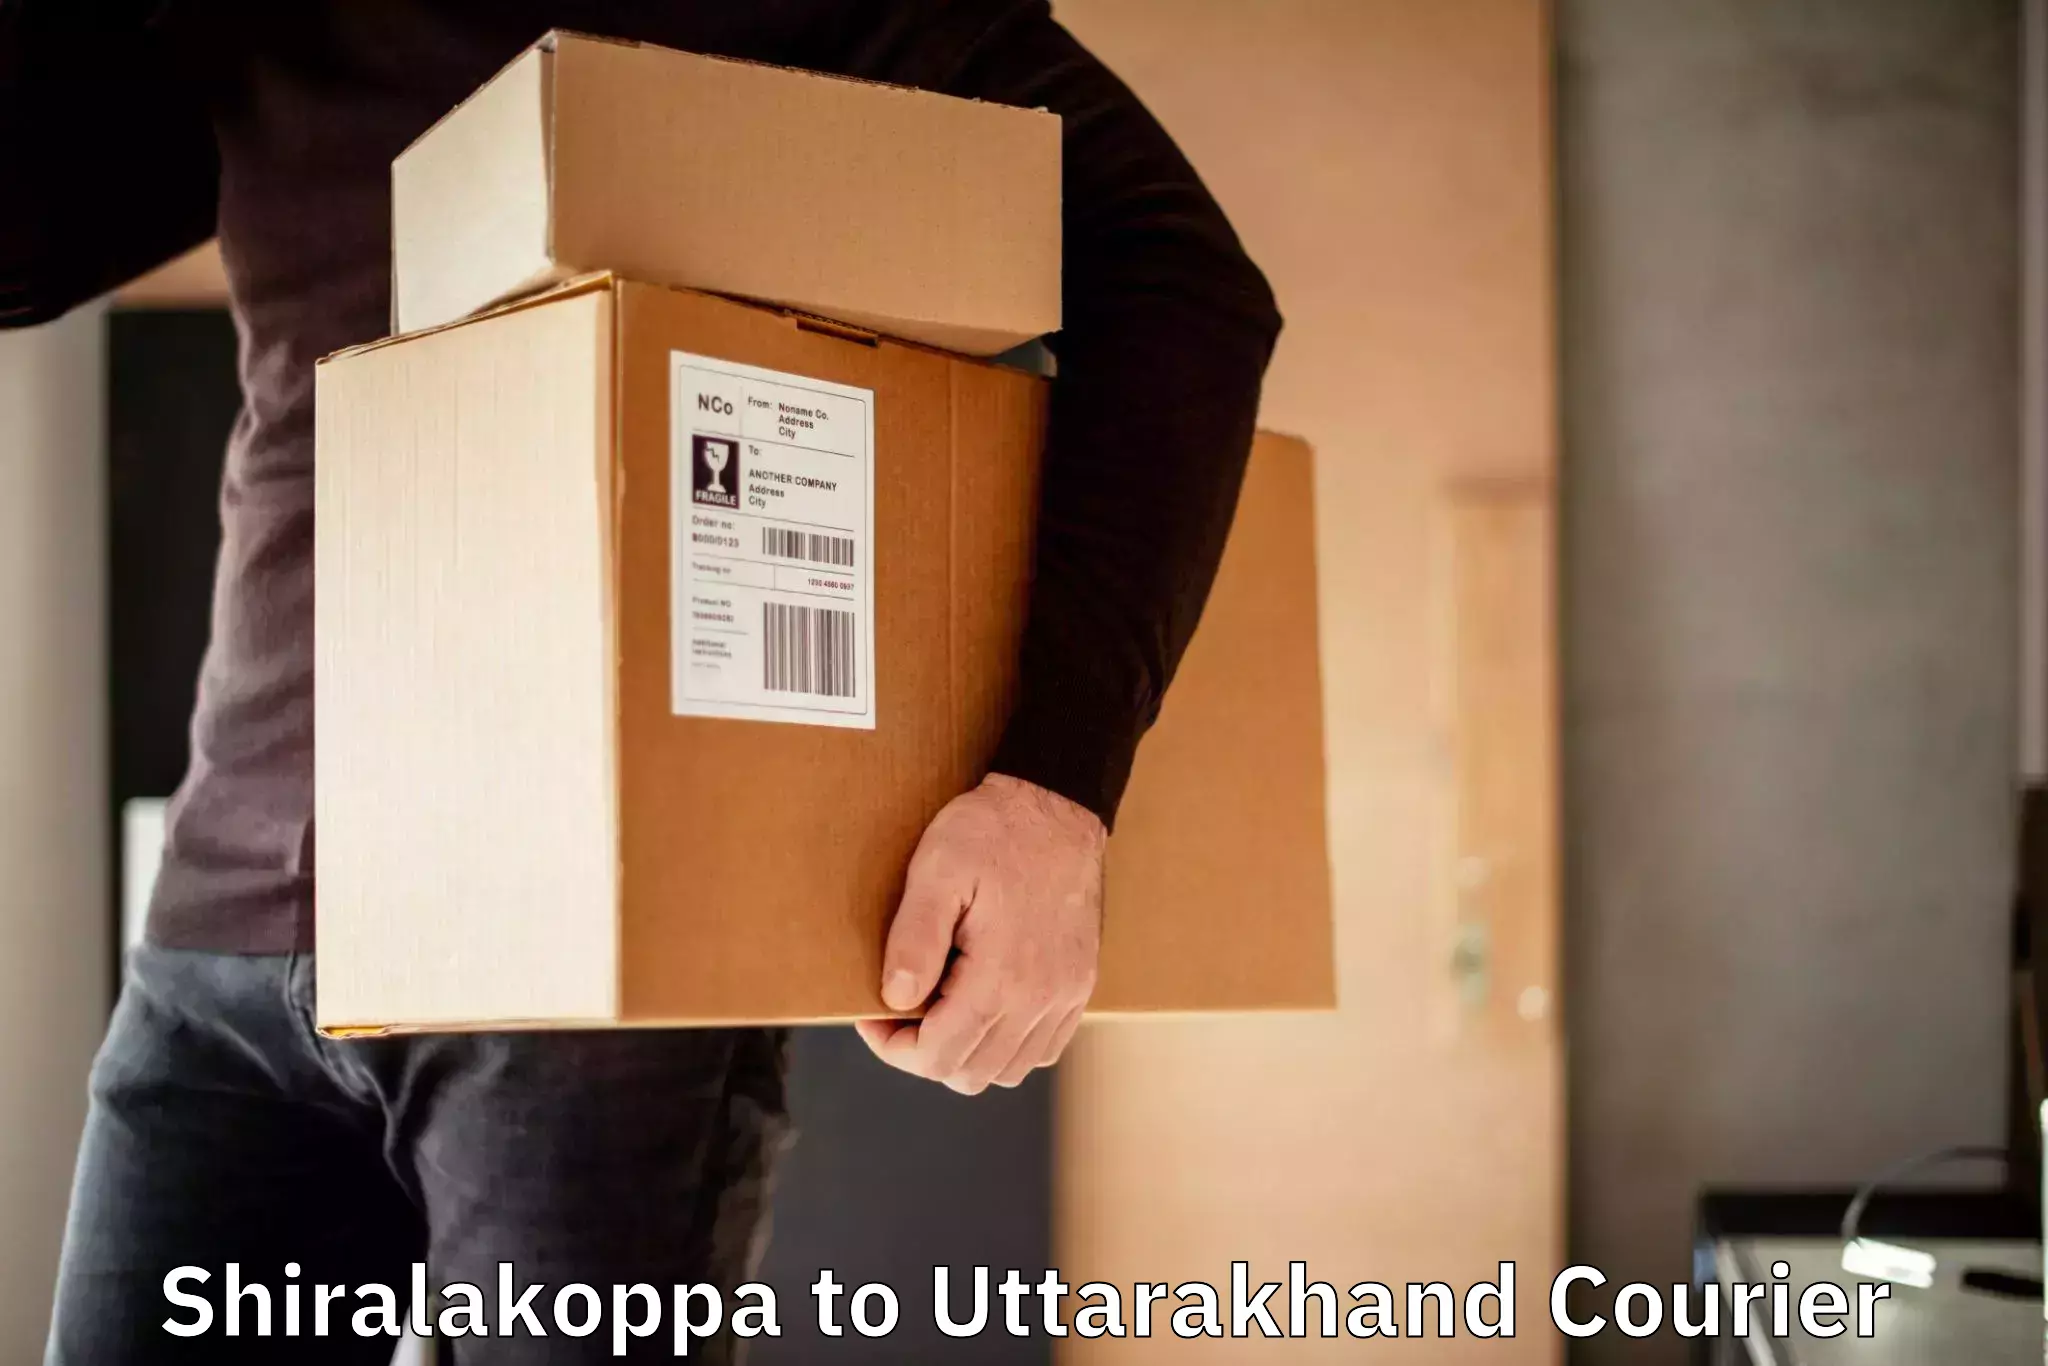 Tailored delivery services Shiralakoppa to Rishikesh